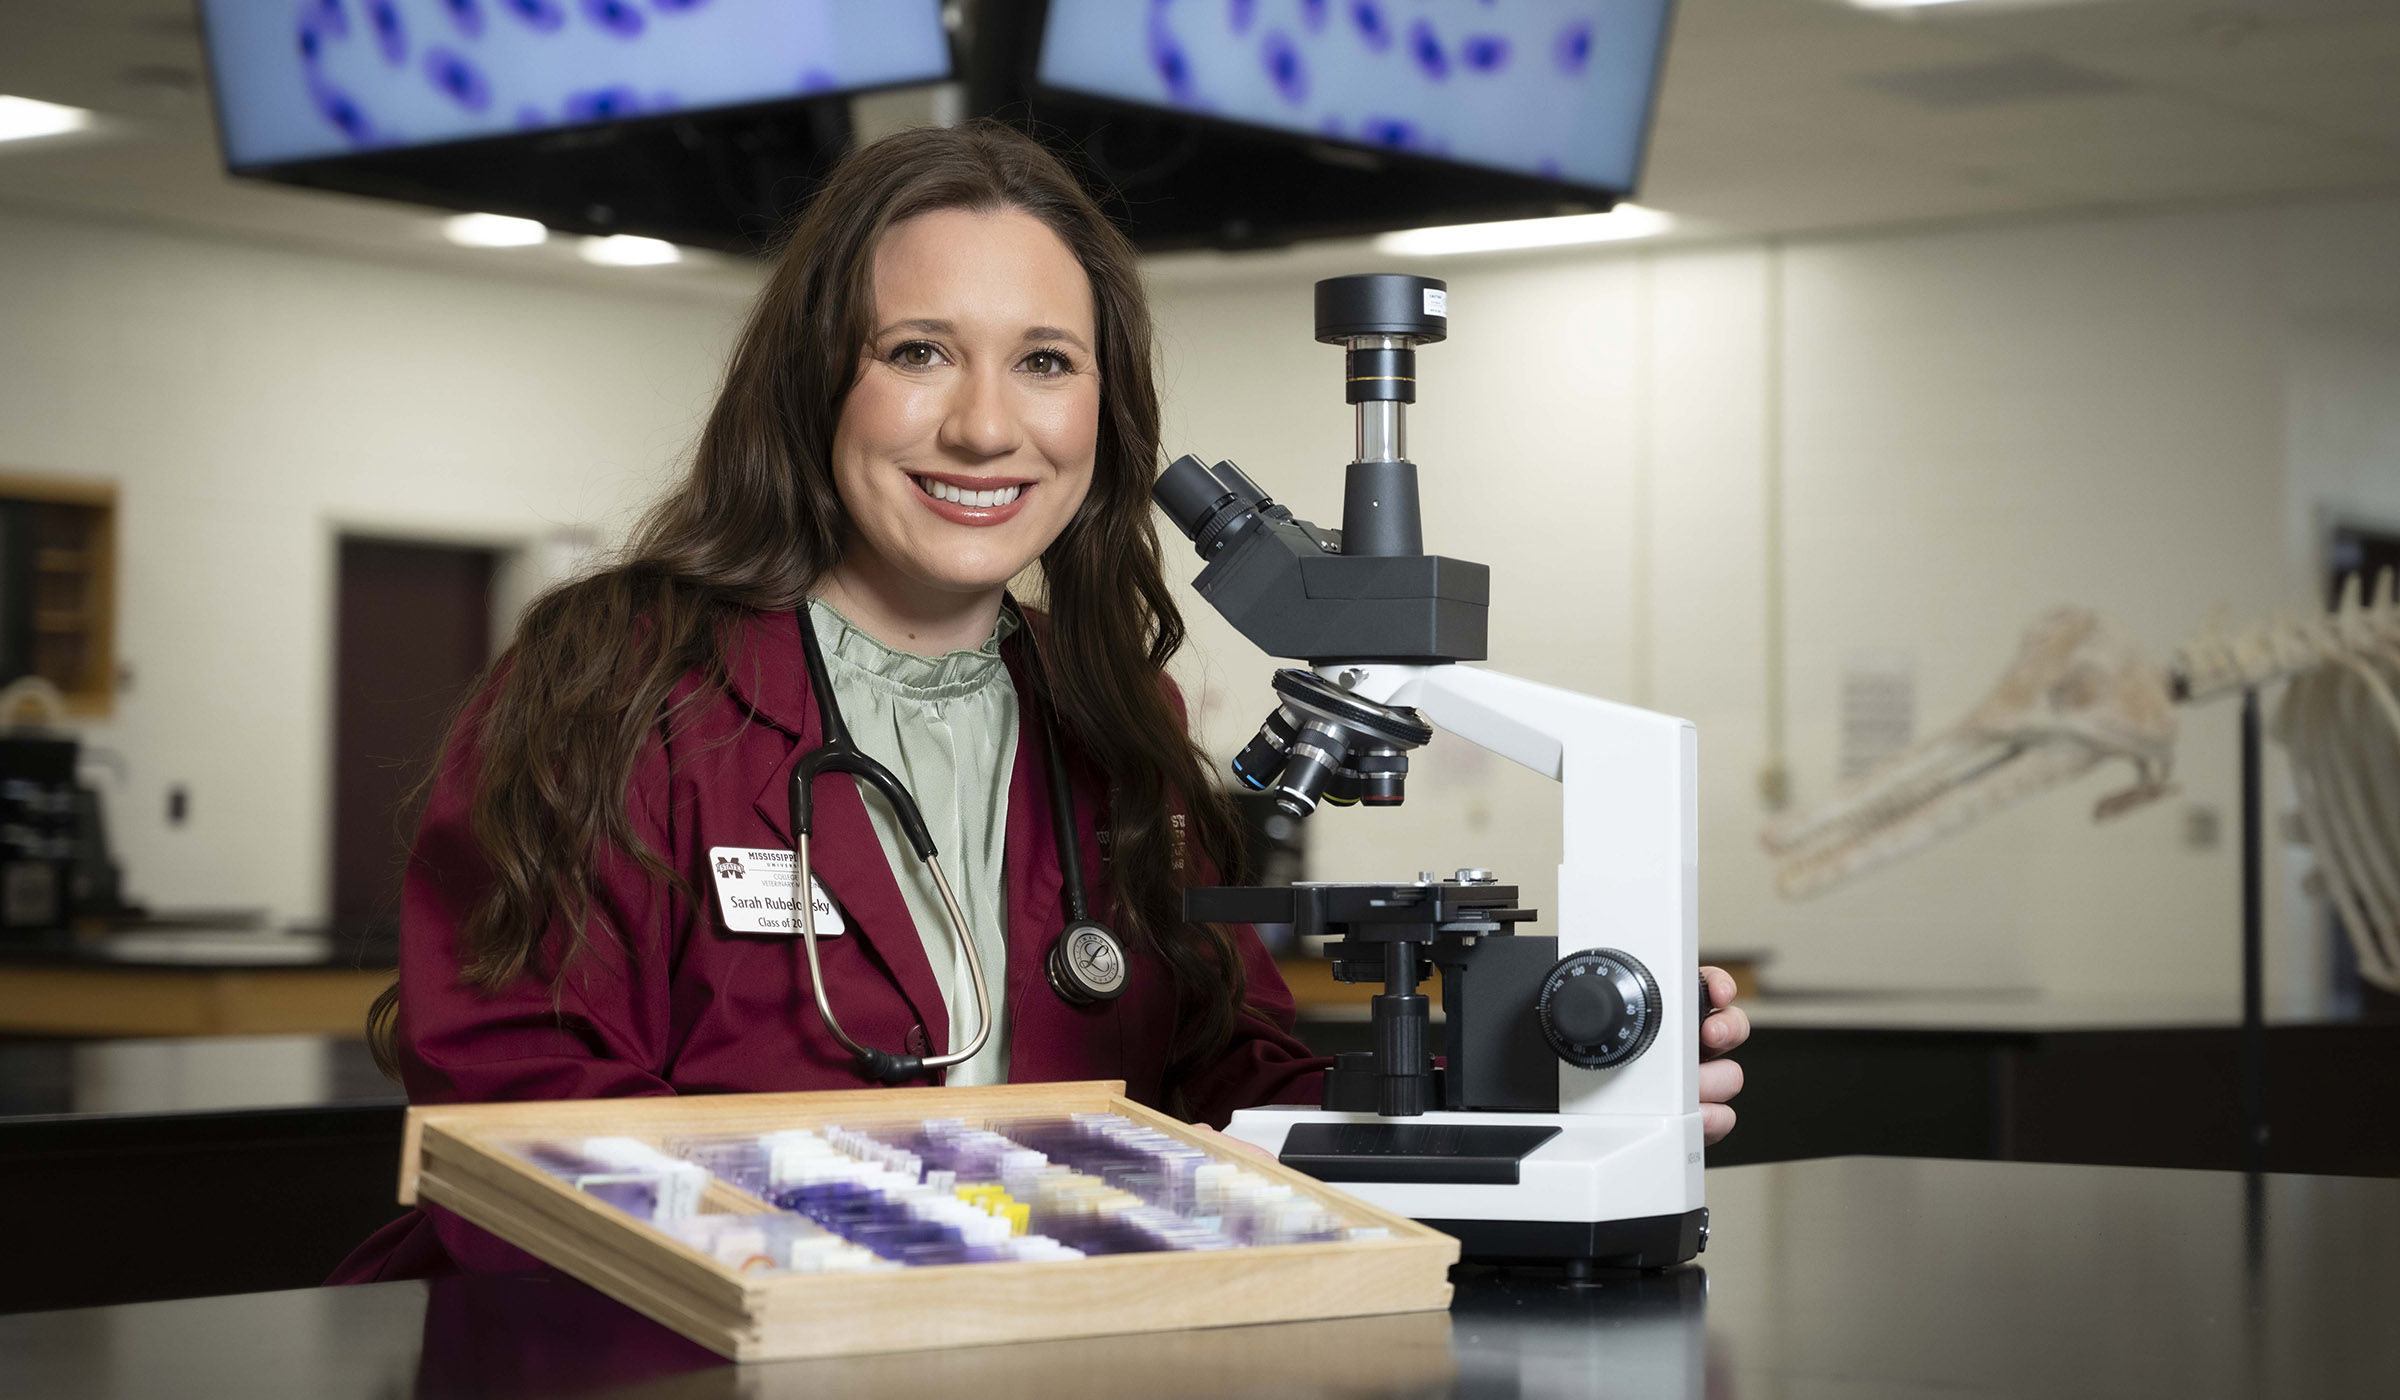 Sarah Rubelowsky, pictured in a lab next to a microscope